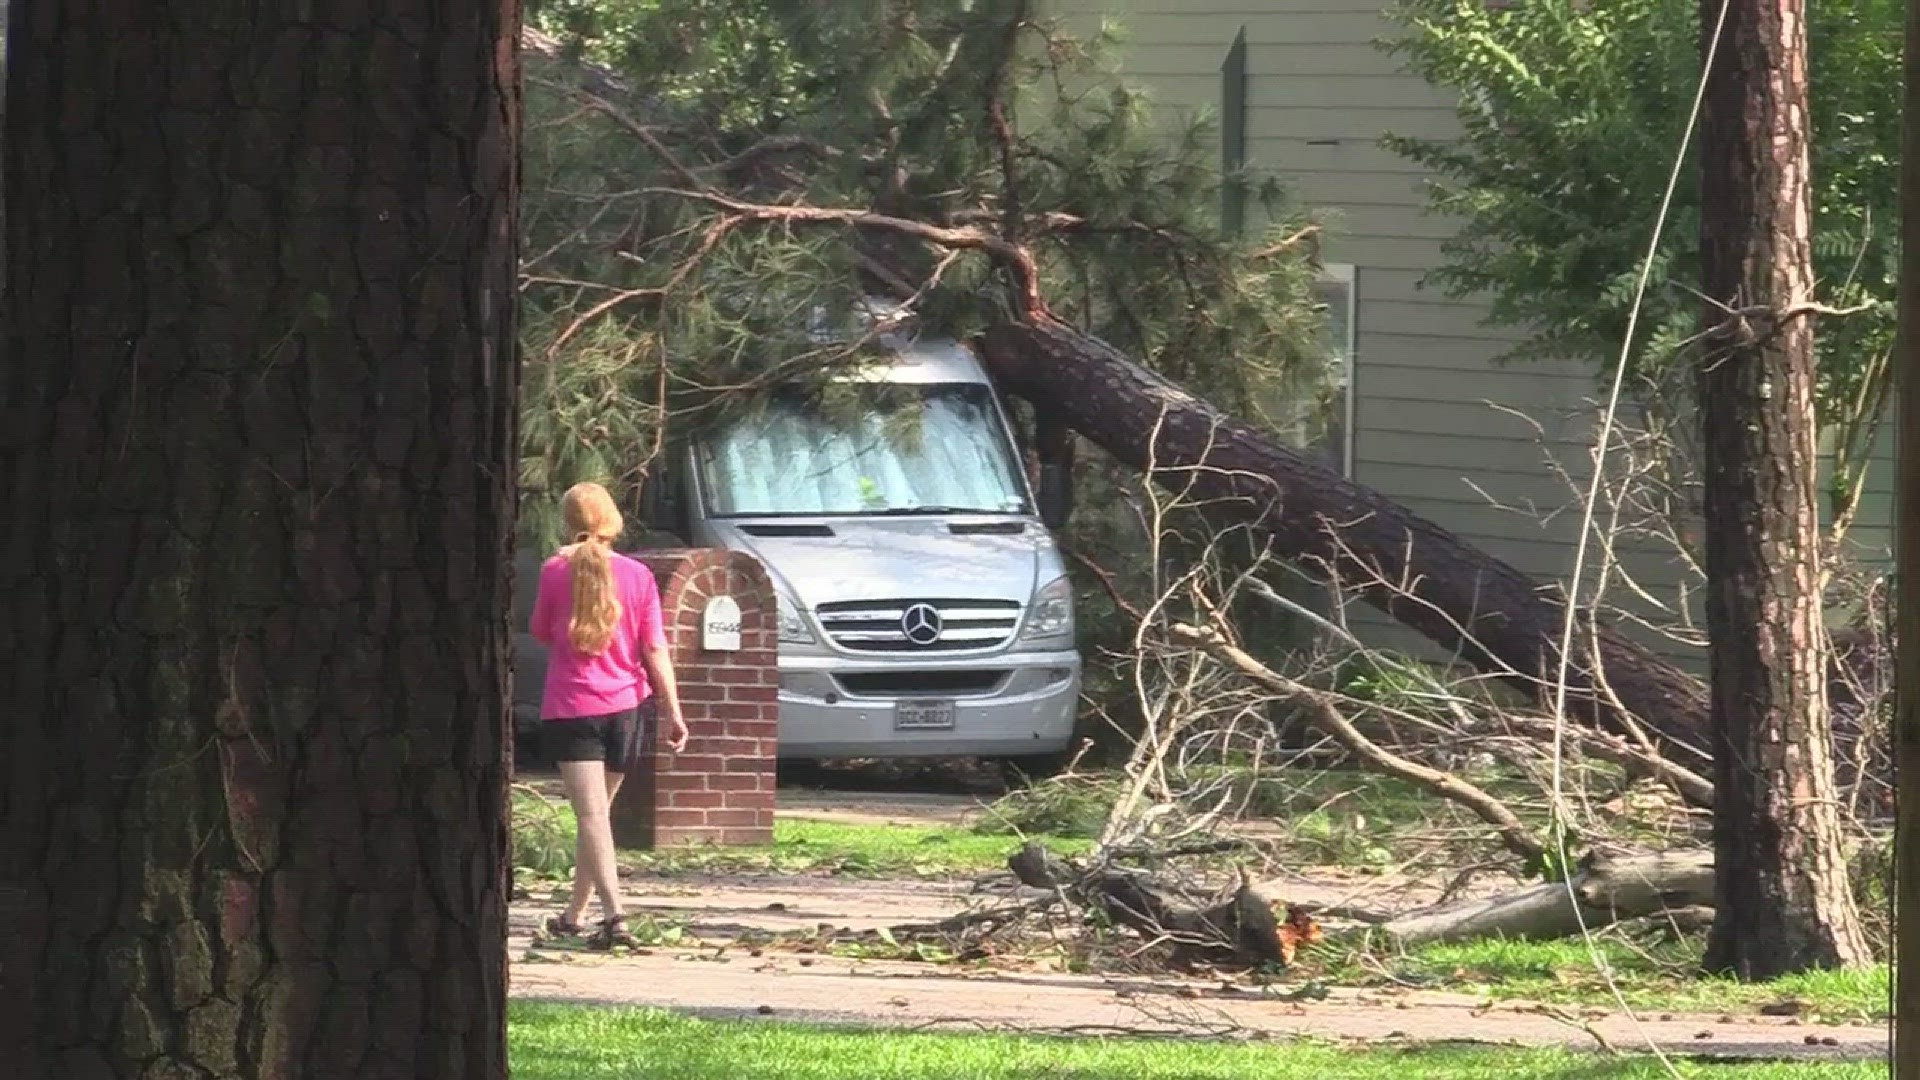 Houses were damaged and trees were blown over after a severe storm ripped through Burnt Mills.